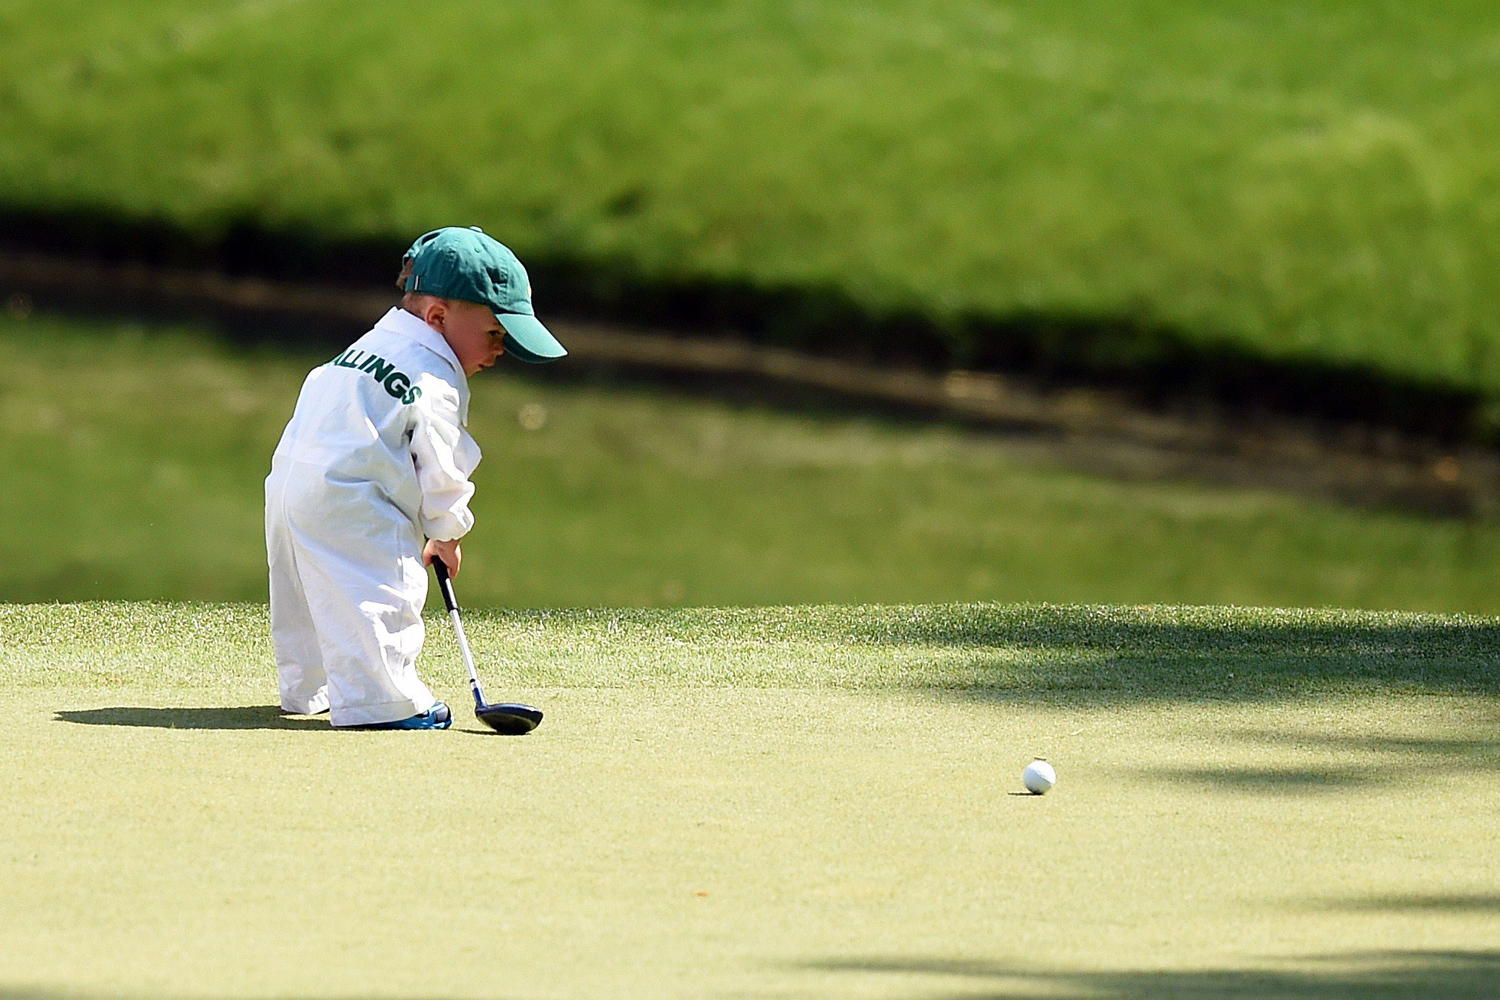 Finn, son of Scott Stallings of the U.S., plays during the Par 3 Contest prior the start of the 78th Masters Golf Tournament at Augusta National Golf Club on April 9, 2014 in Augusta, Georgia.